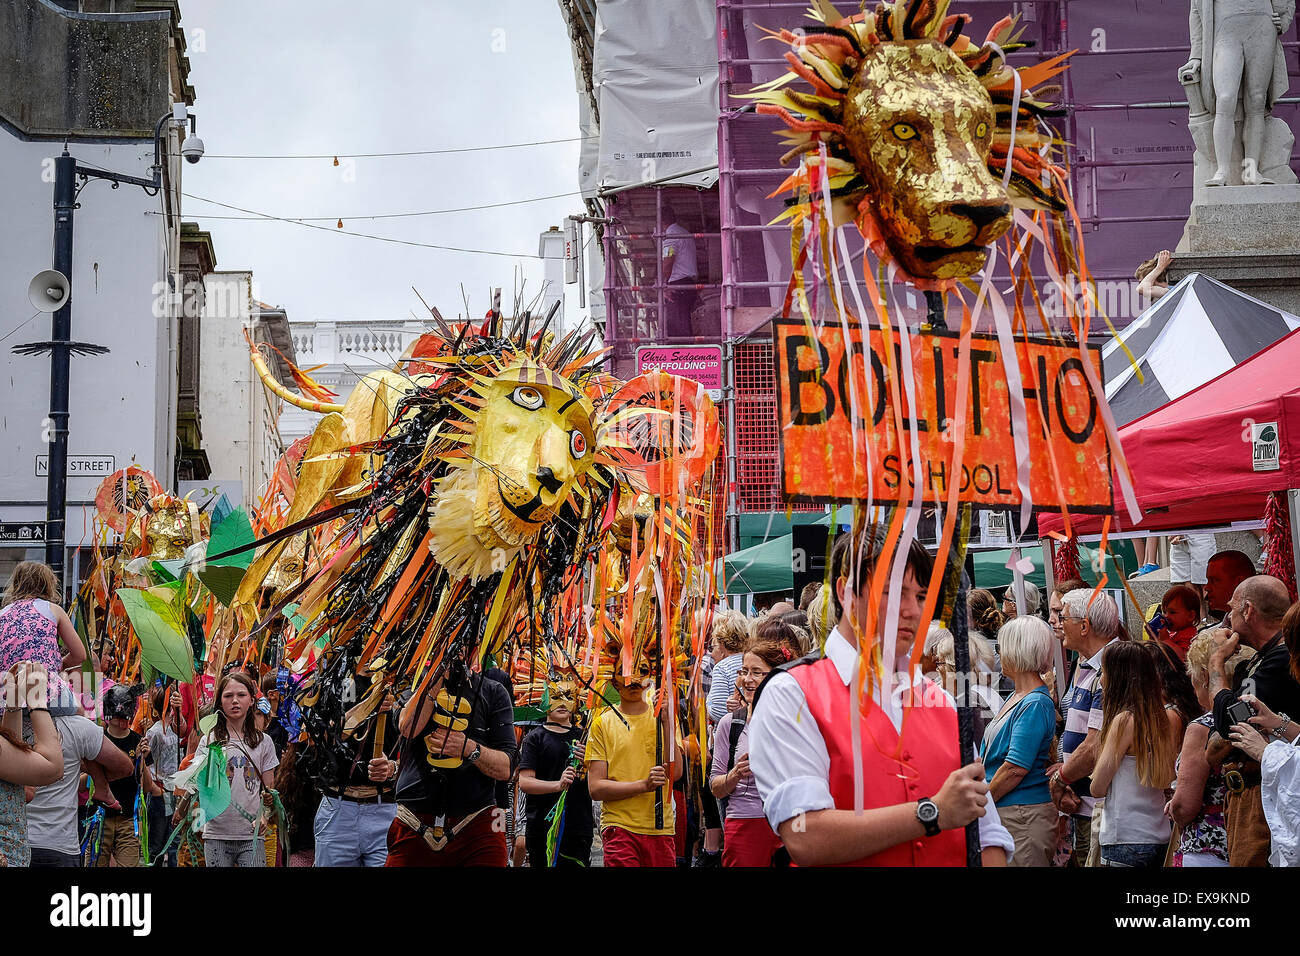 Large effigies of Lions carried by students from Bolitho School in colourful parades on Mazey Day, part of the Golowan Festival. Stock Photo